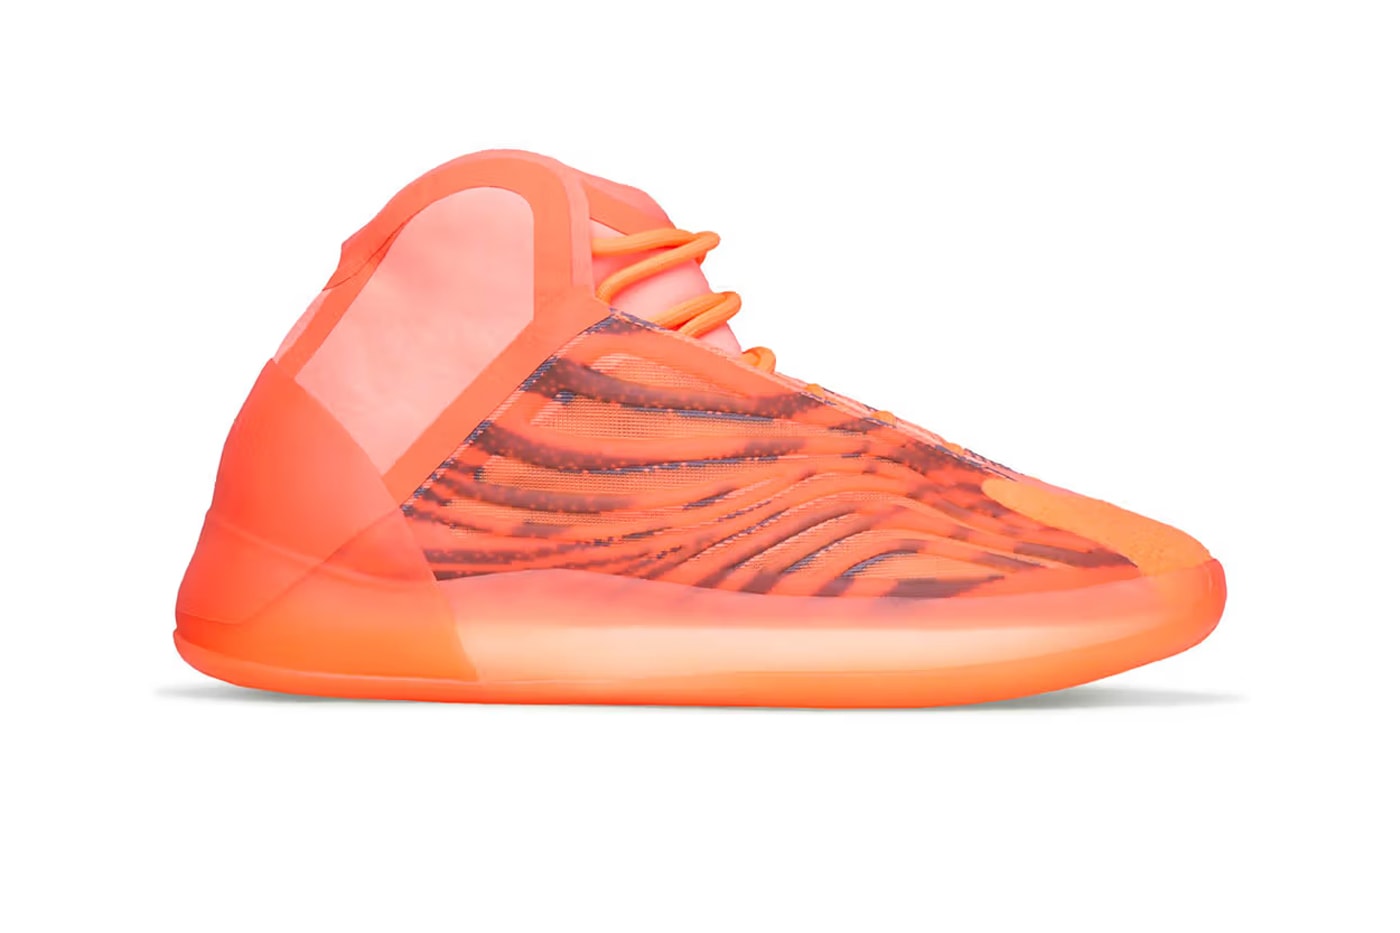 adidas yeezy qntm orange release date info store list buying guide photos price 